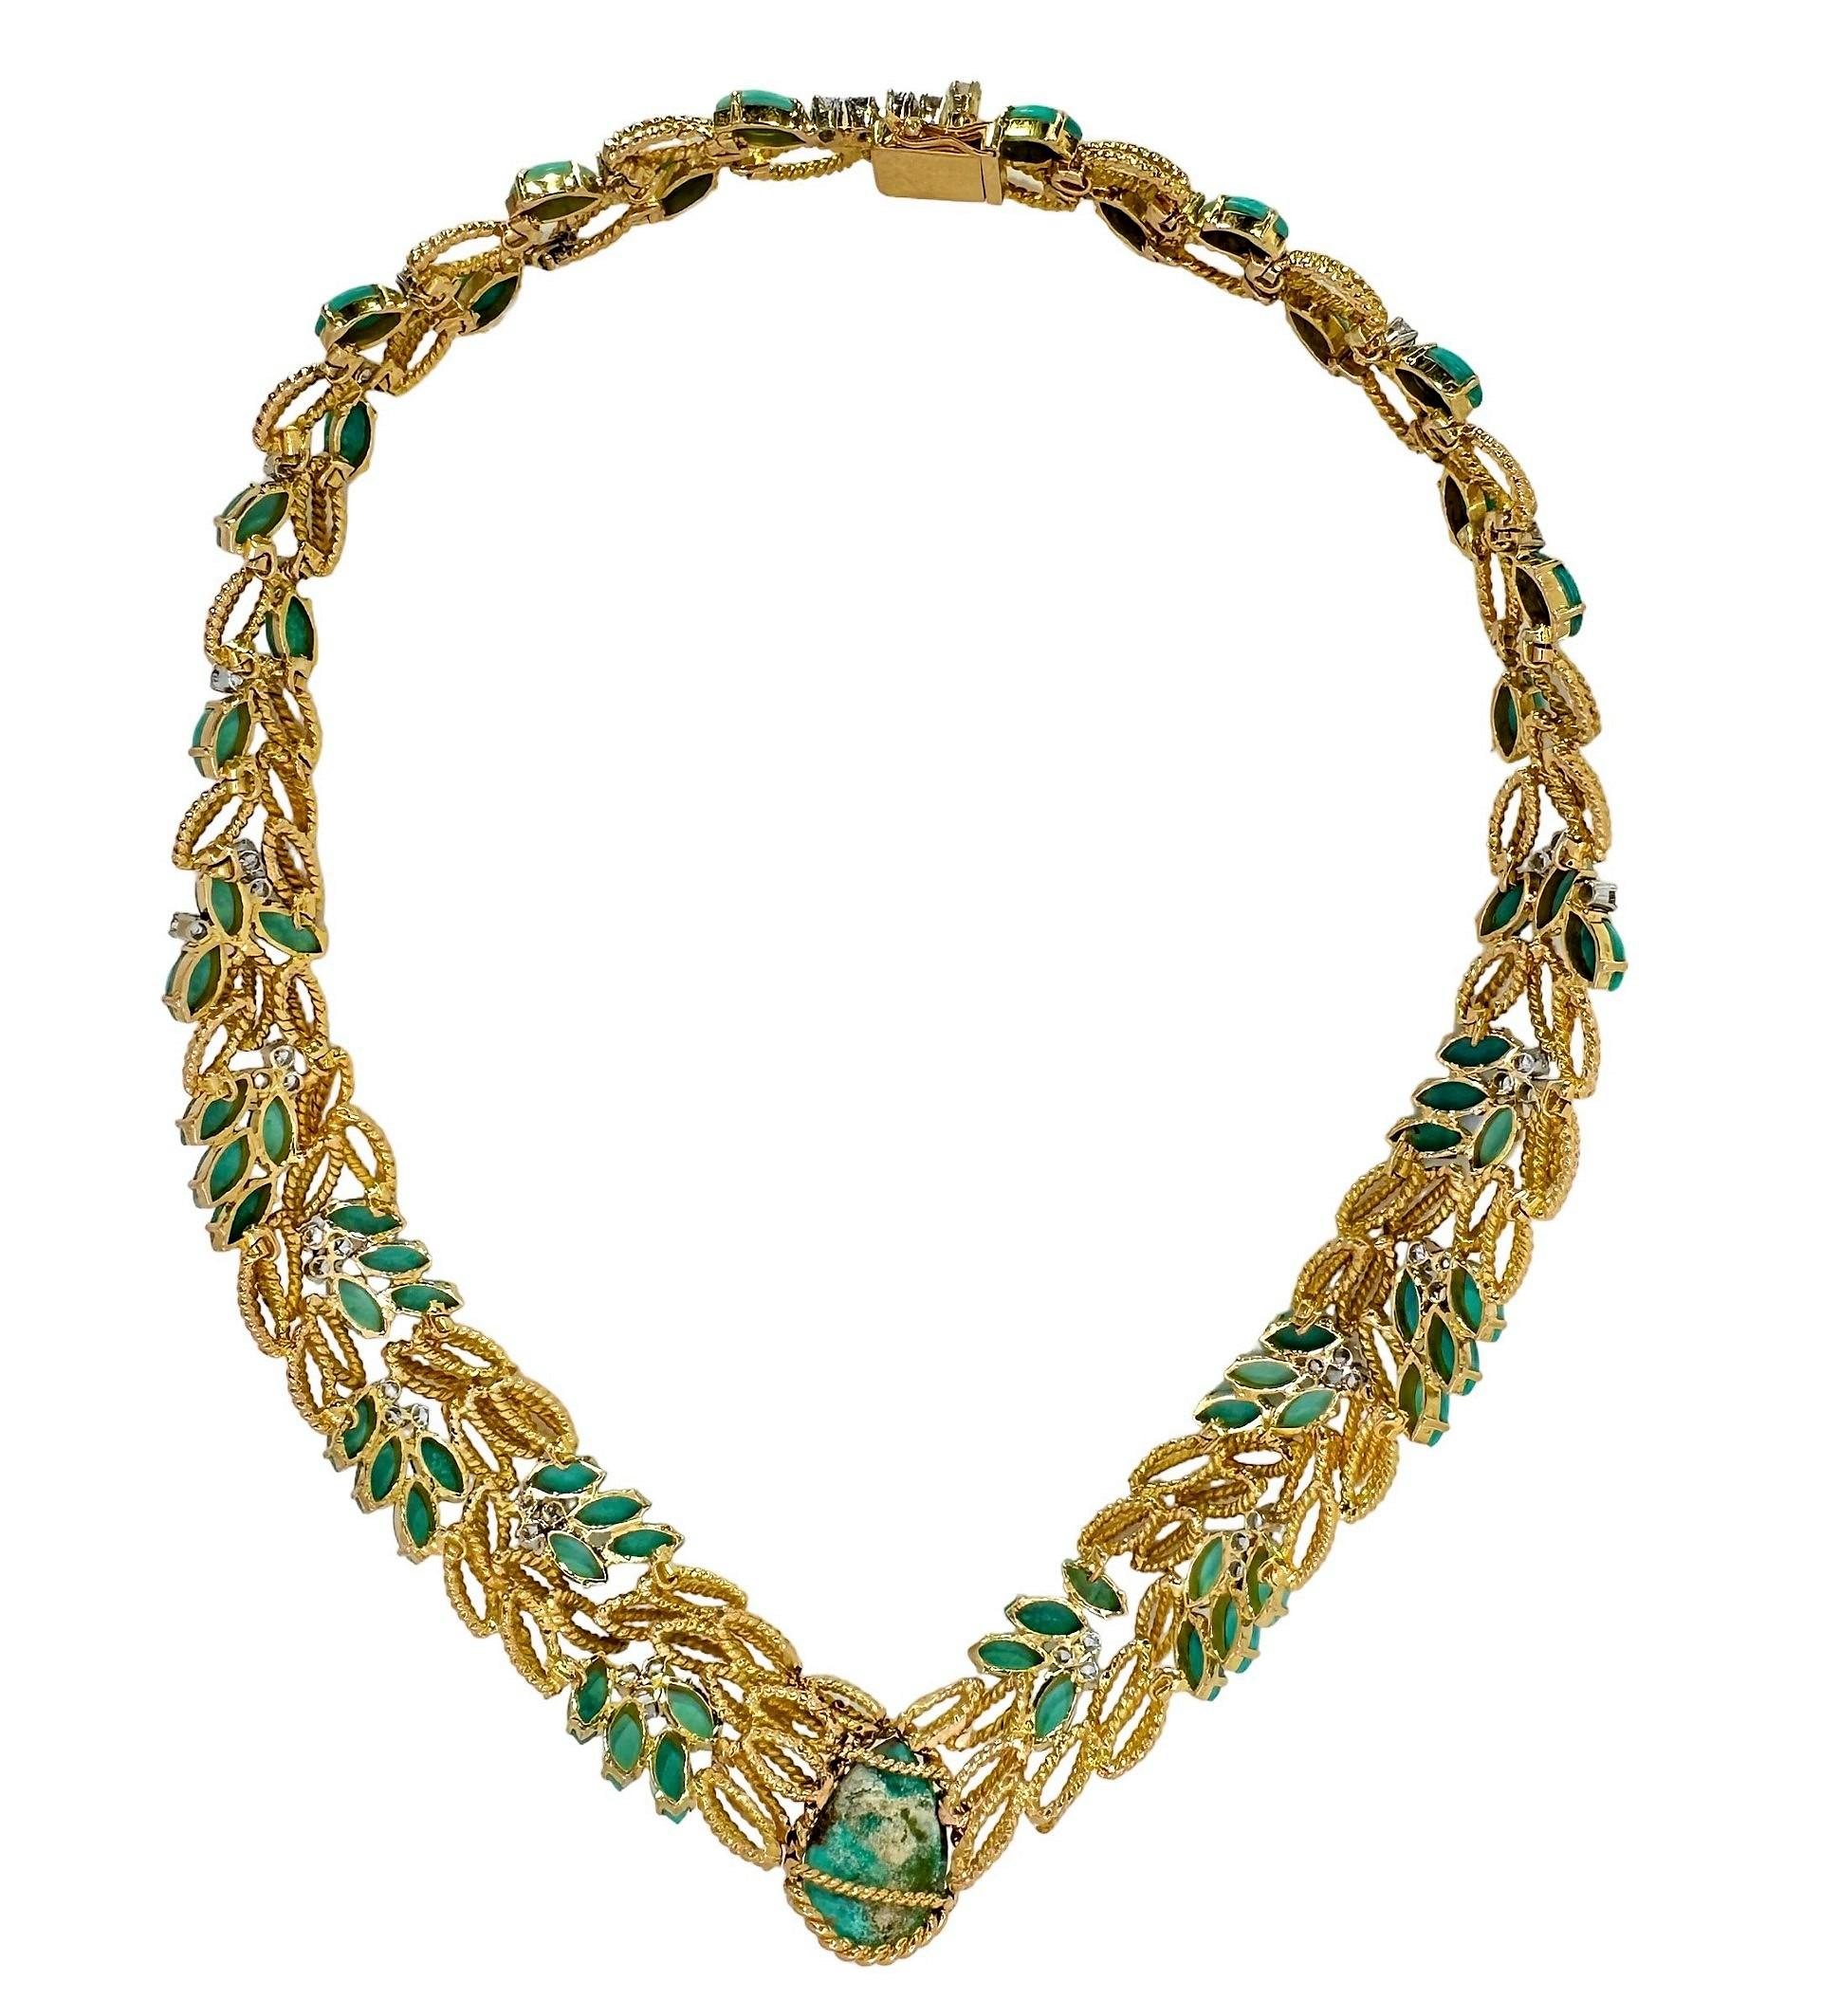 Modern Unique and Lovely Mid-20th Century Cocktail Necklace in Turquoise and Diamonds For Sale